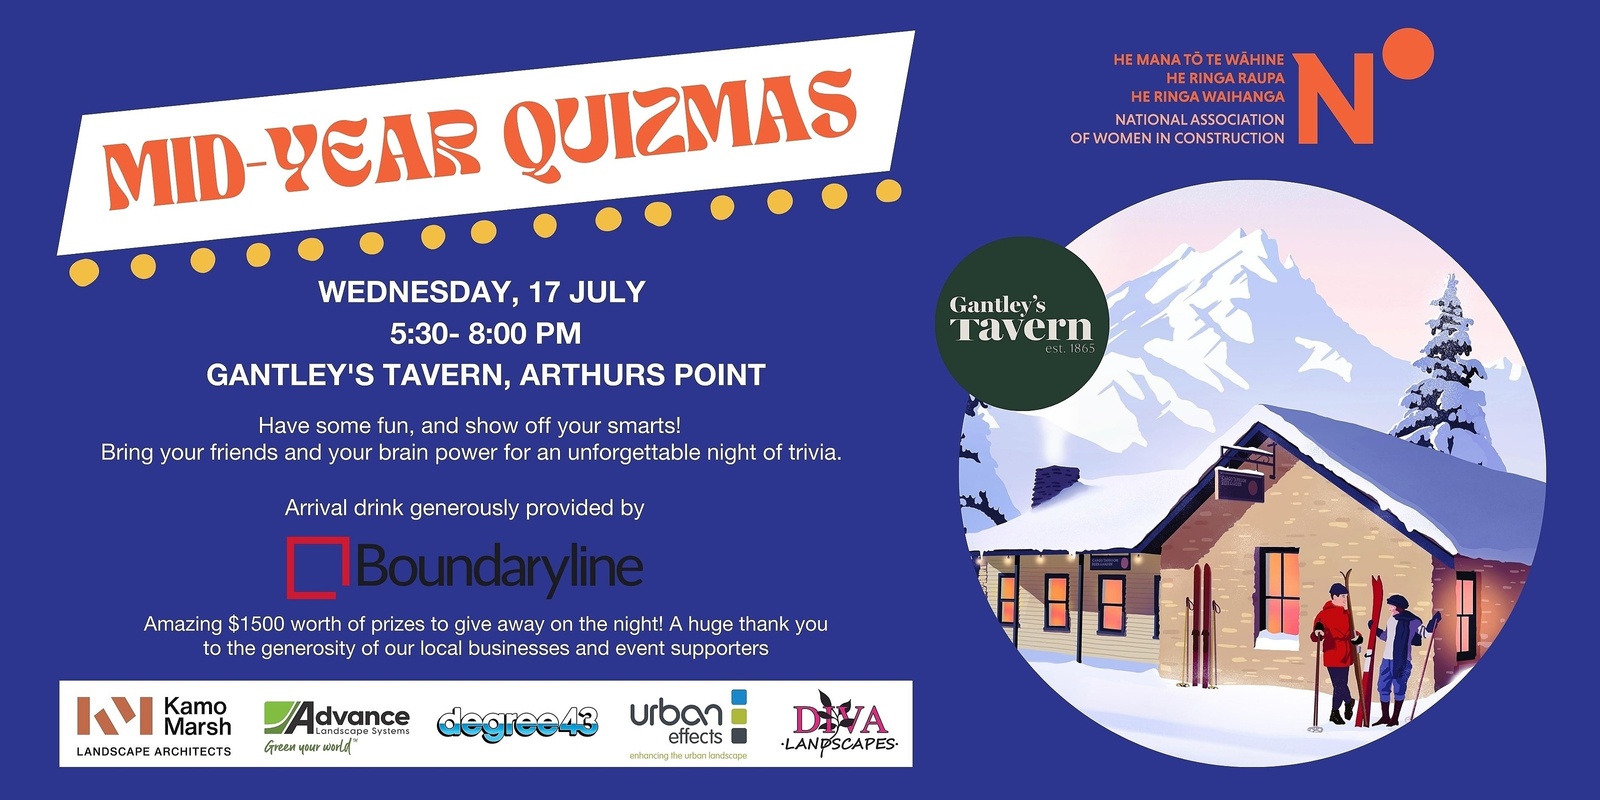 Banner image for NAWIC Queenstown - Mid-Year Quizmas